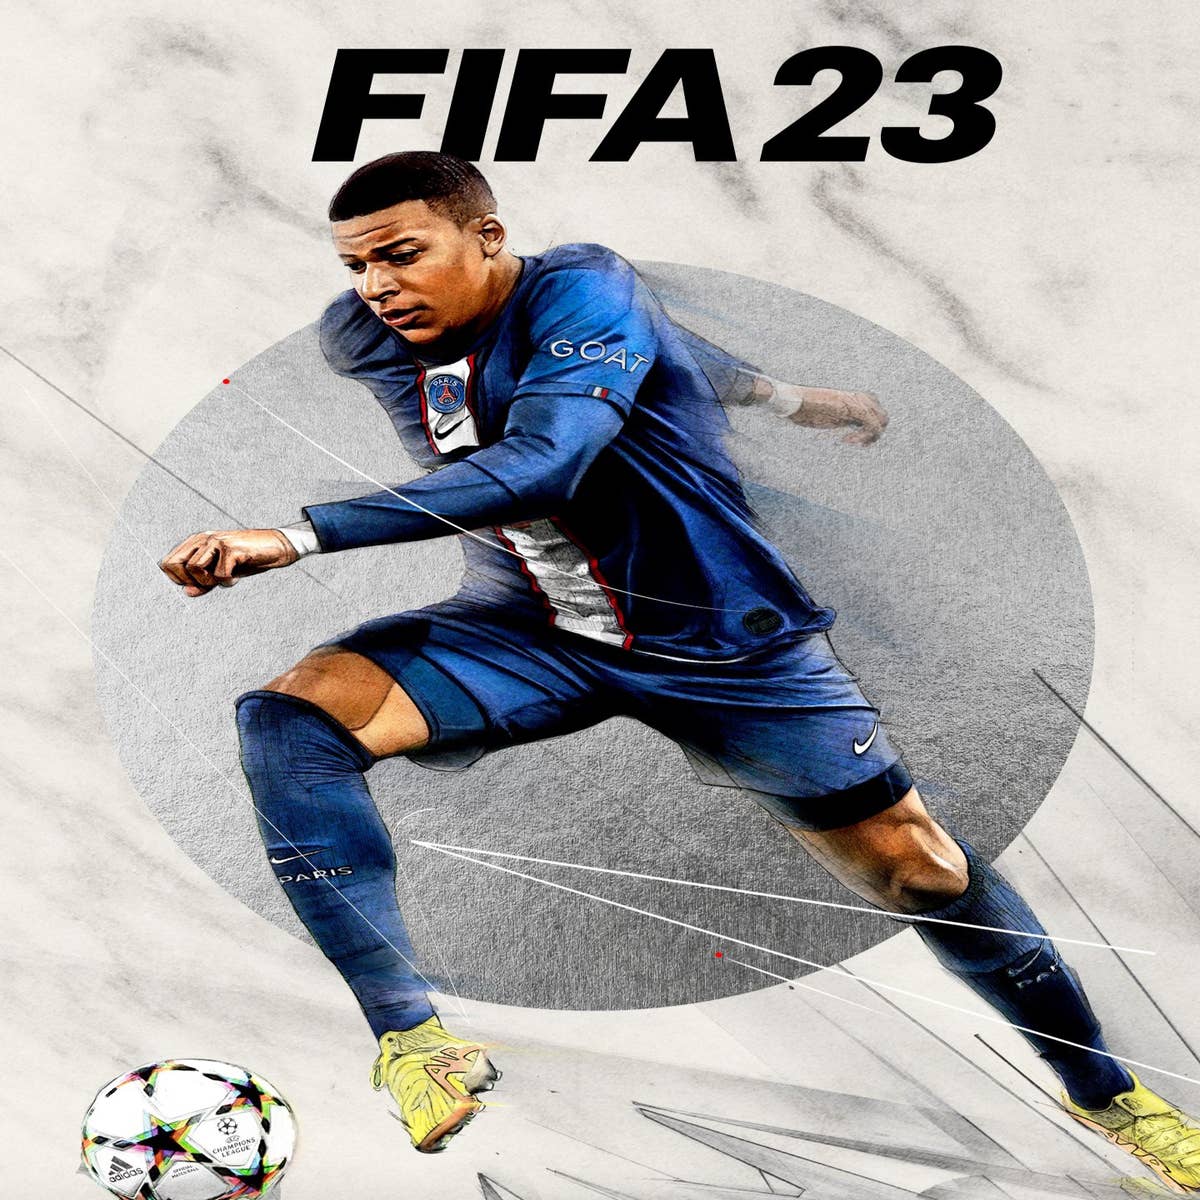 FIFA 23 on PC has feature parity with PS5 and Xbox Series versions